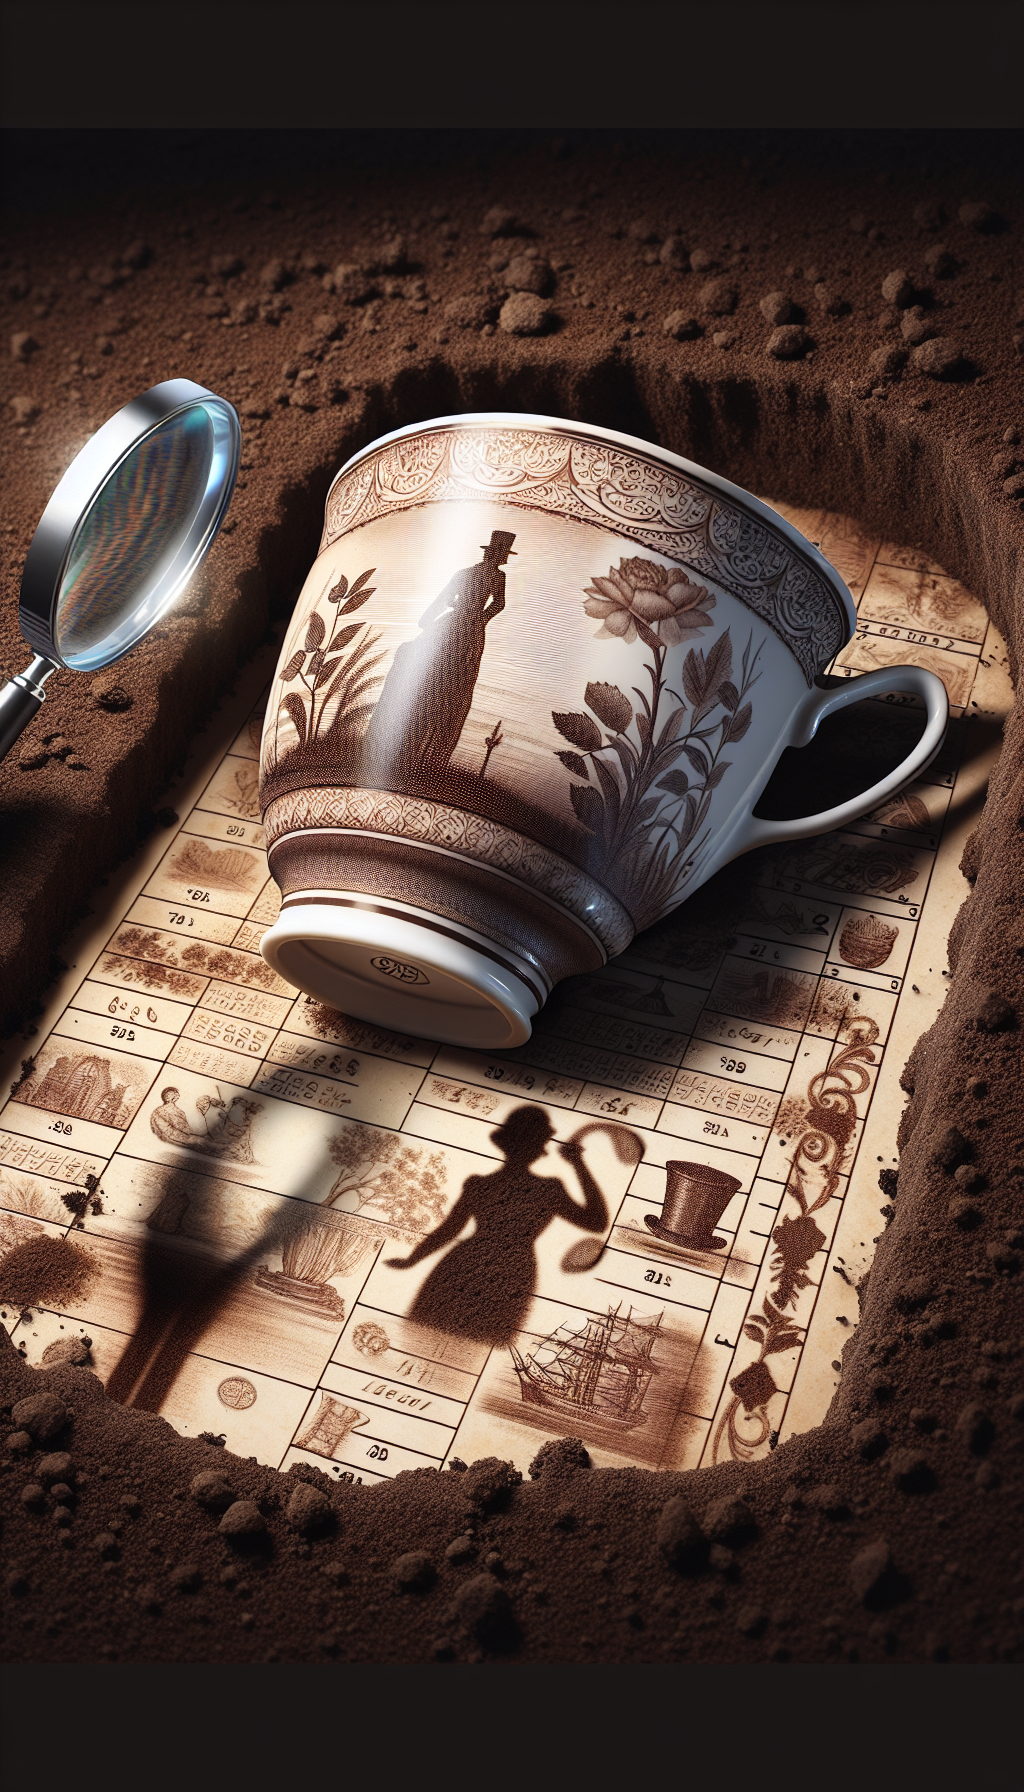 An illustration shows a partially buried, ornate antique tea cup in the soil, a magnifying glass hovering over the distinct hallmark at its base. Faint images of past eras like silhouettes—Victorian ladies, ancient trade ships—form the cup's delicate pattern. The cup casts a shadow that morphs into a timeline, detailing historical periods, anchoring the concept of age and origin.